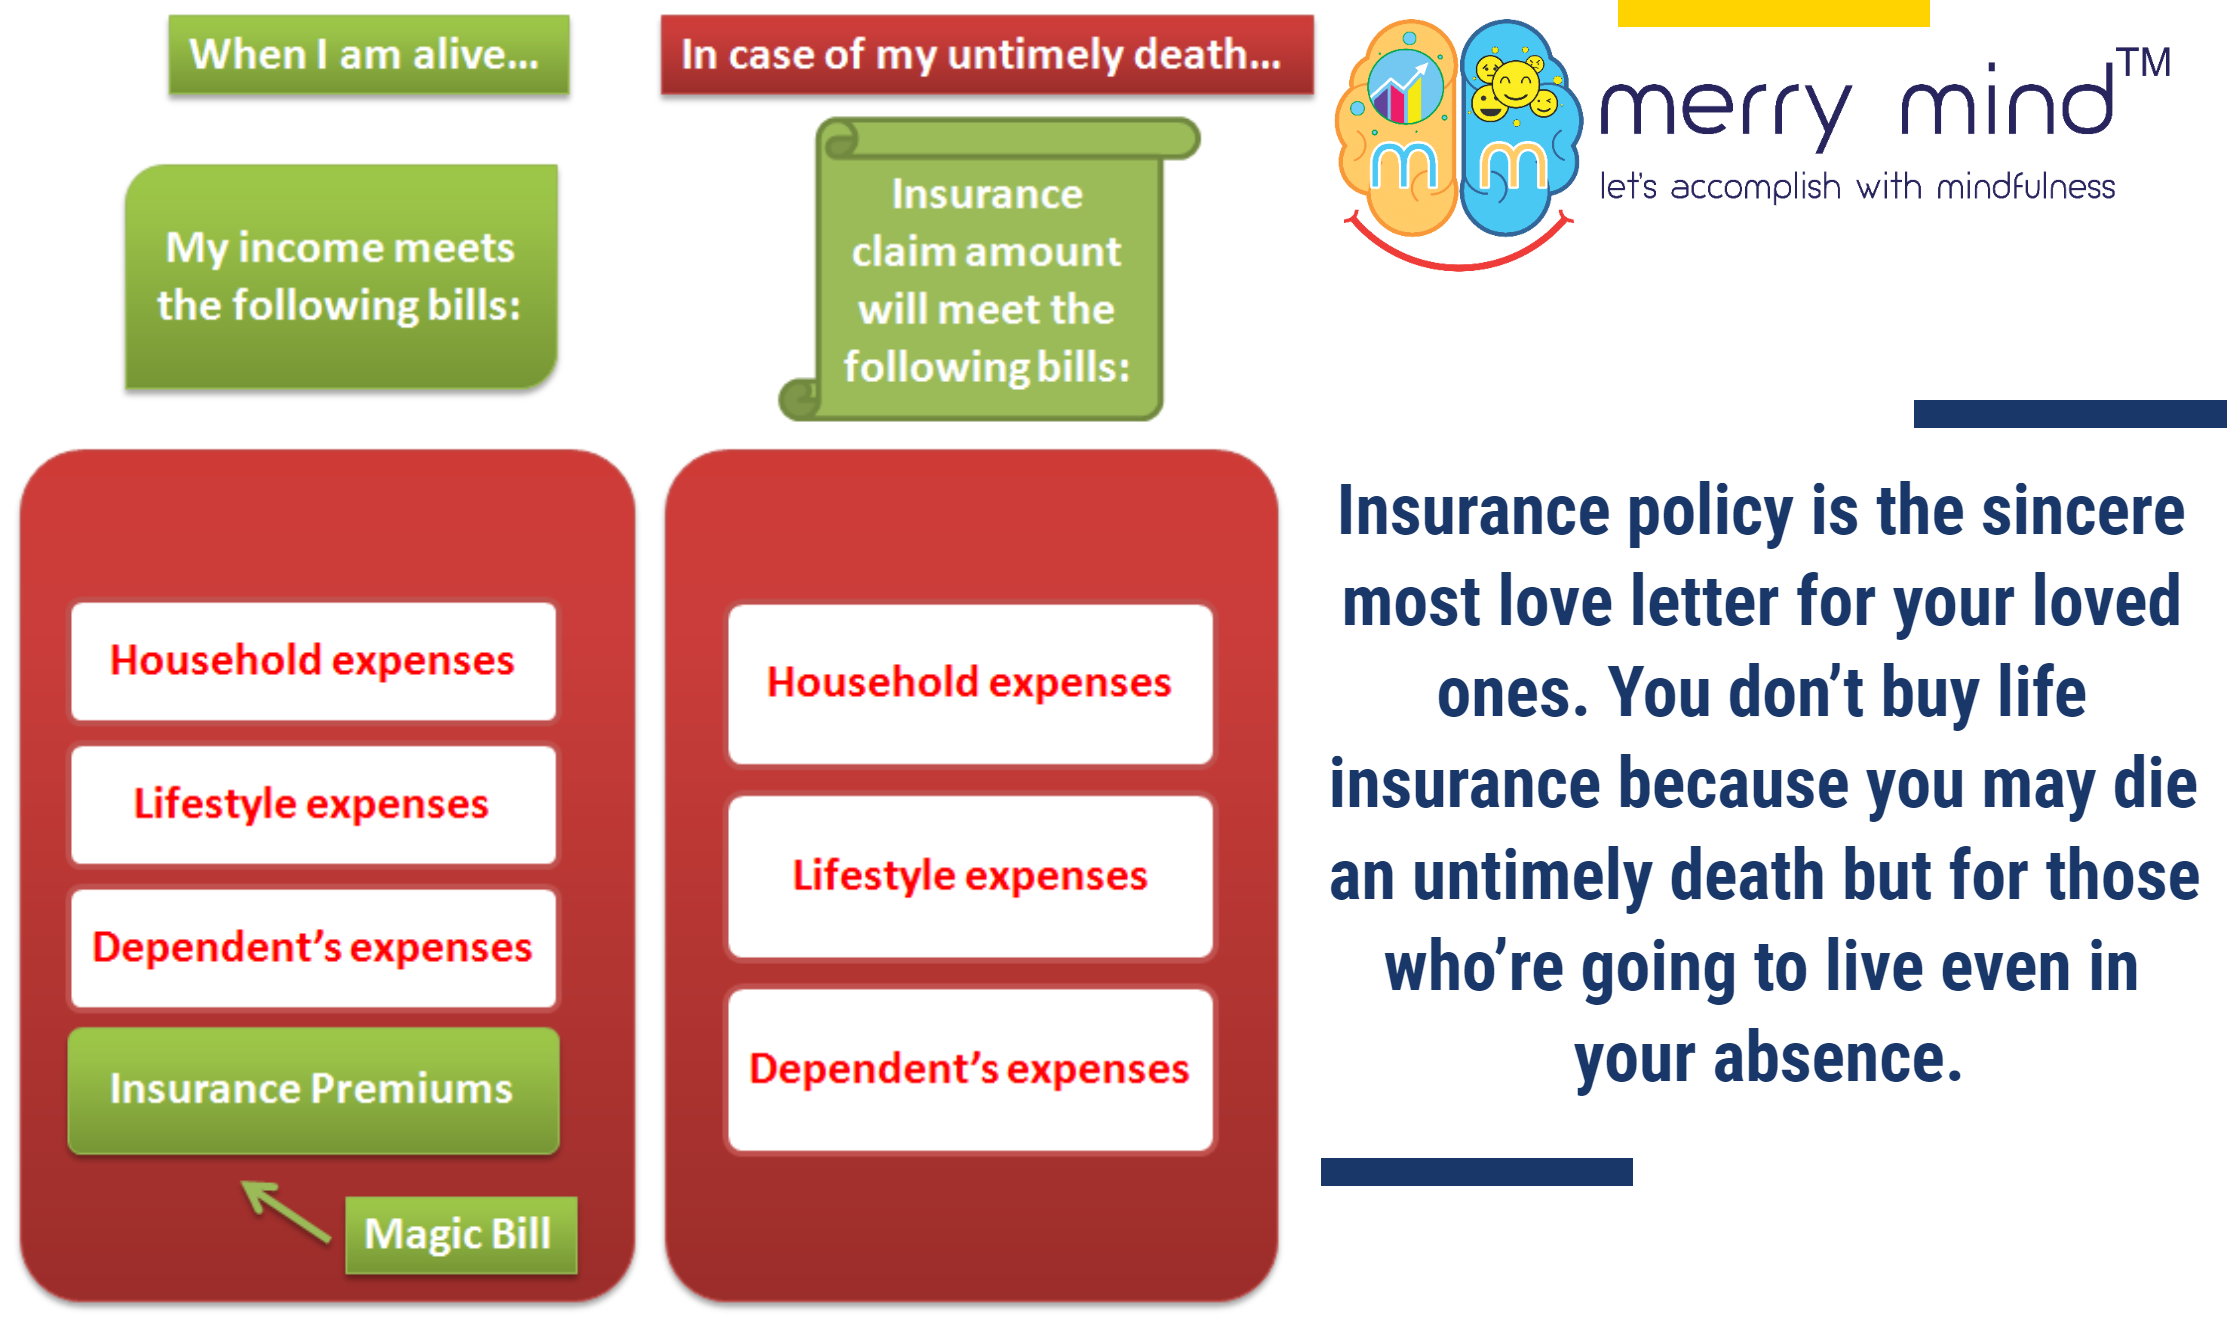 Life insurance is a mitigation to the risk of your life